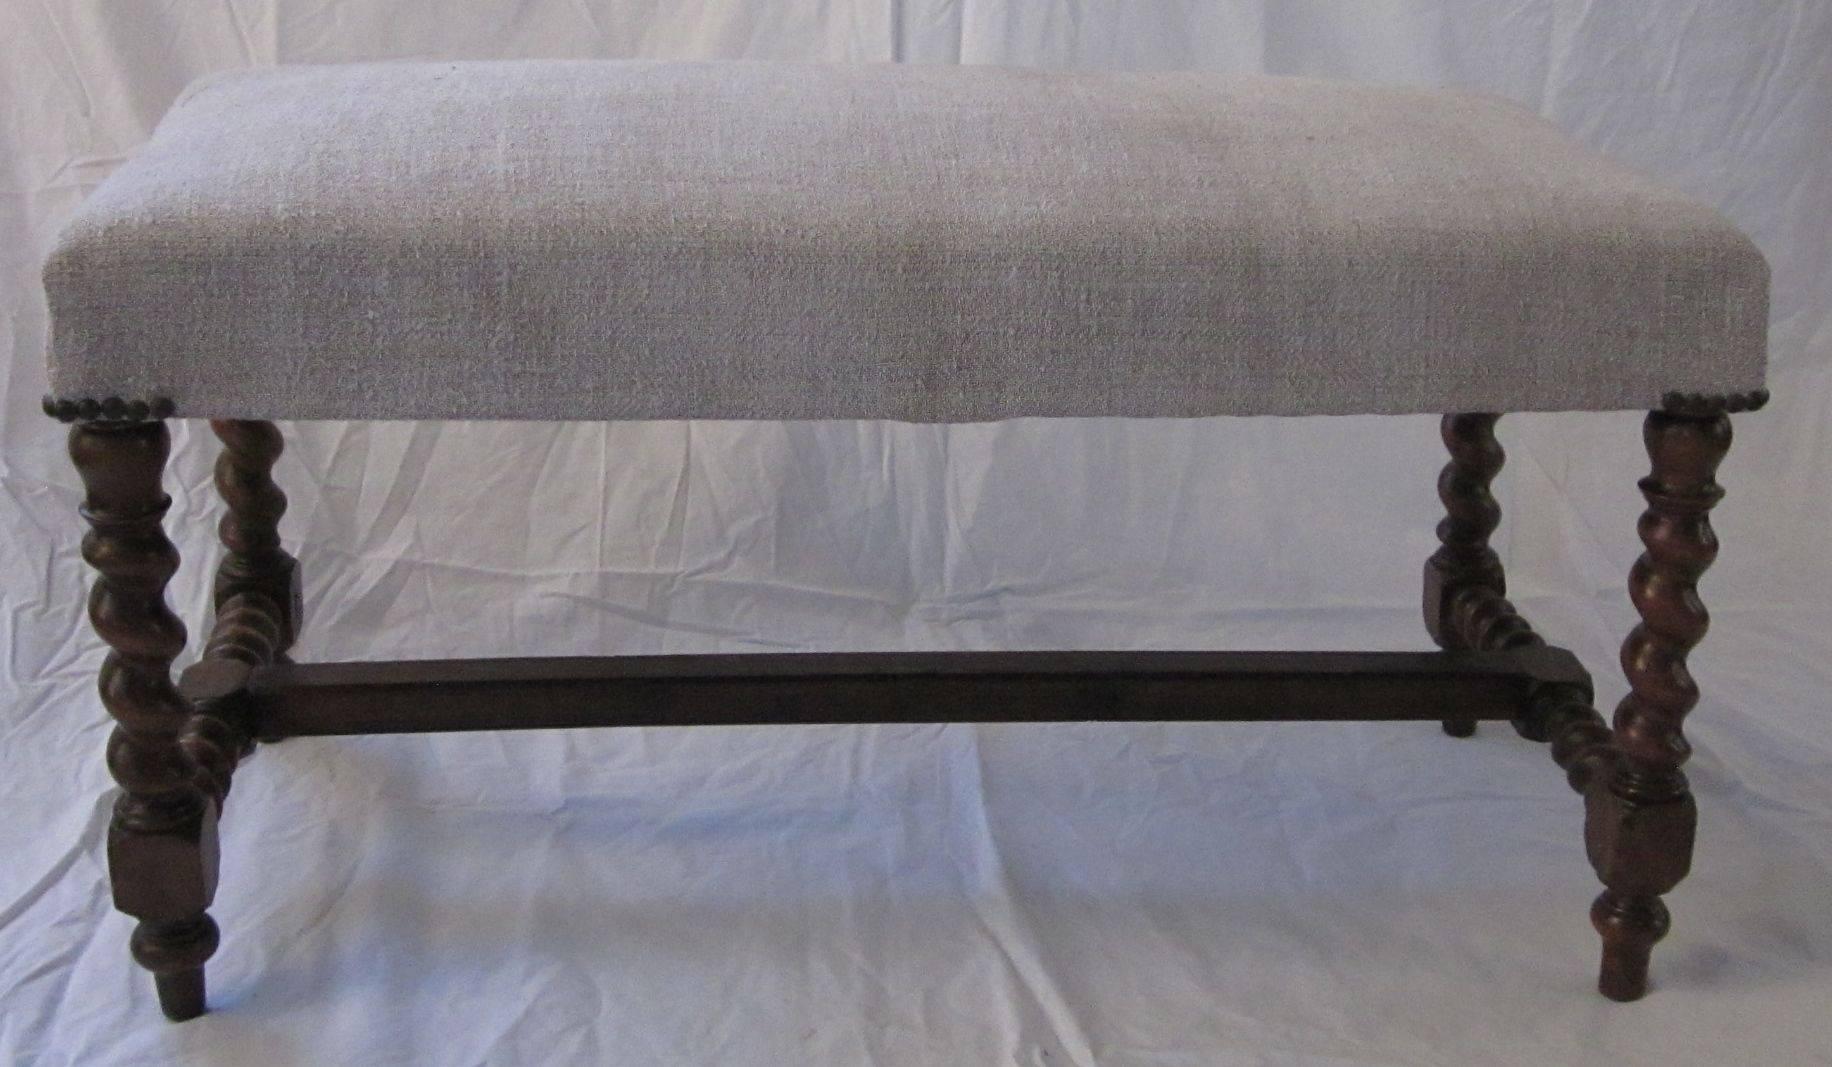 19th century Italian spool leg bench.  Legs are spool leg, center bar is flat.
The bench has been recently reupholstered in vintage Belgian linen.
Excellent condition.